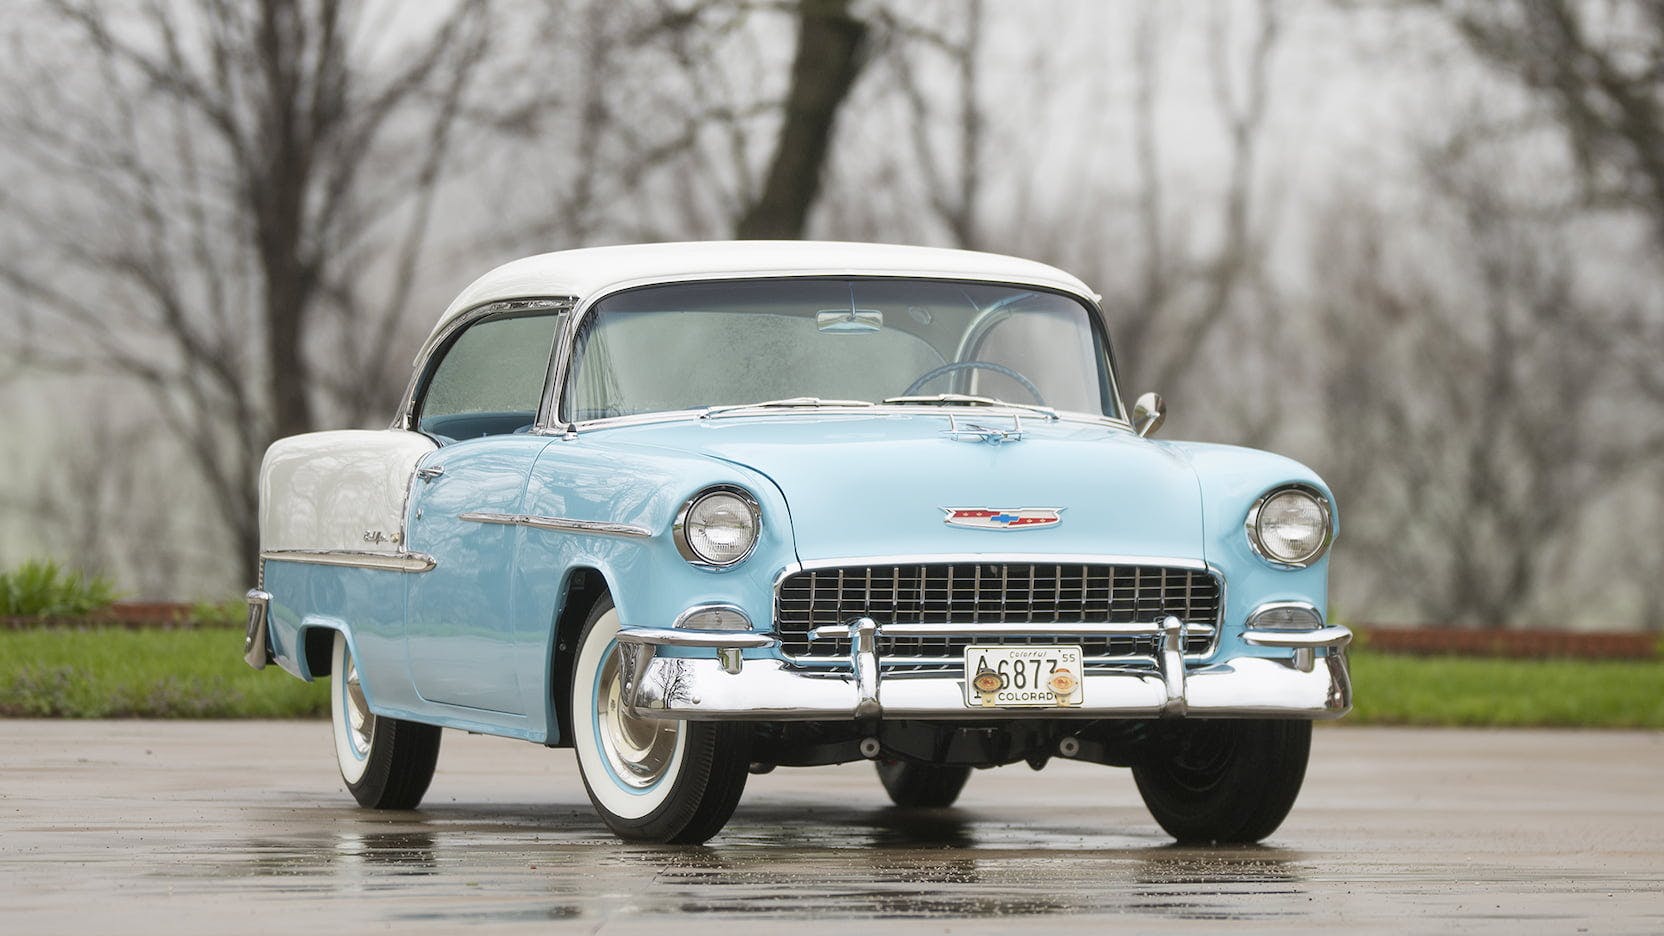 1955 Chevy Bel Air front